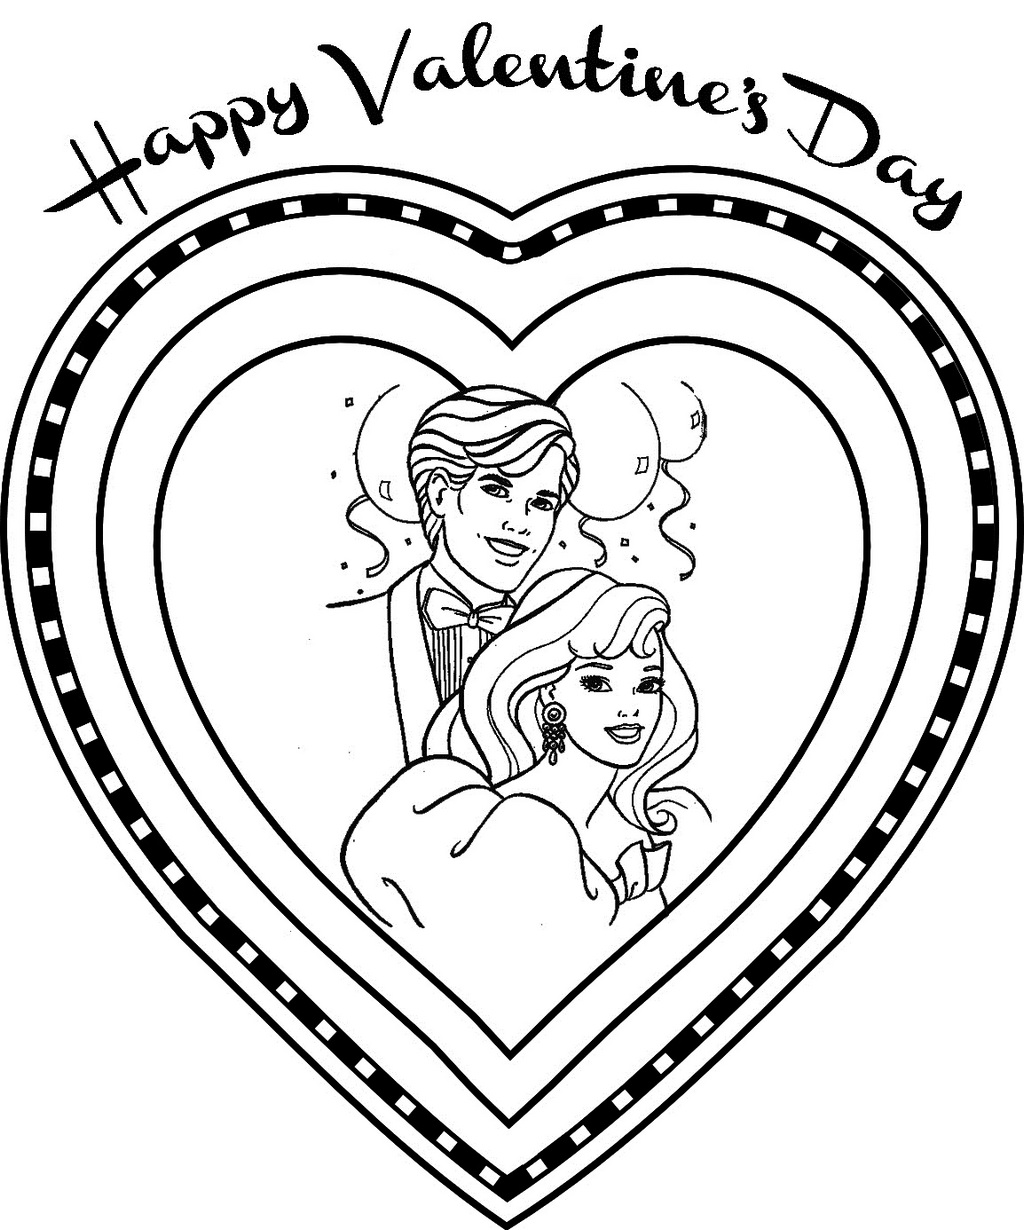 barbie valentine day coloring book for girls